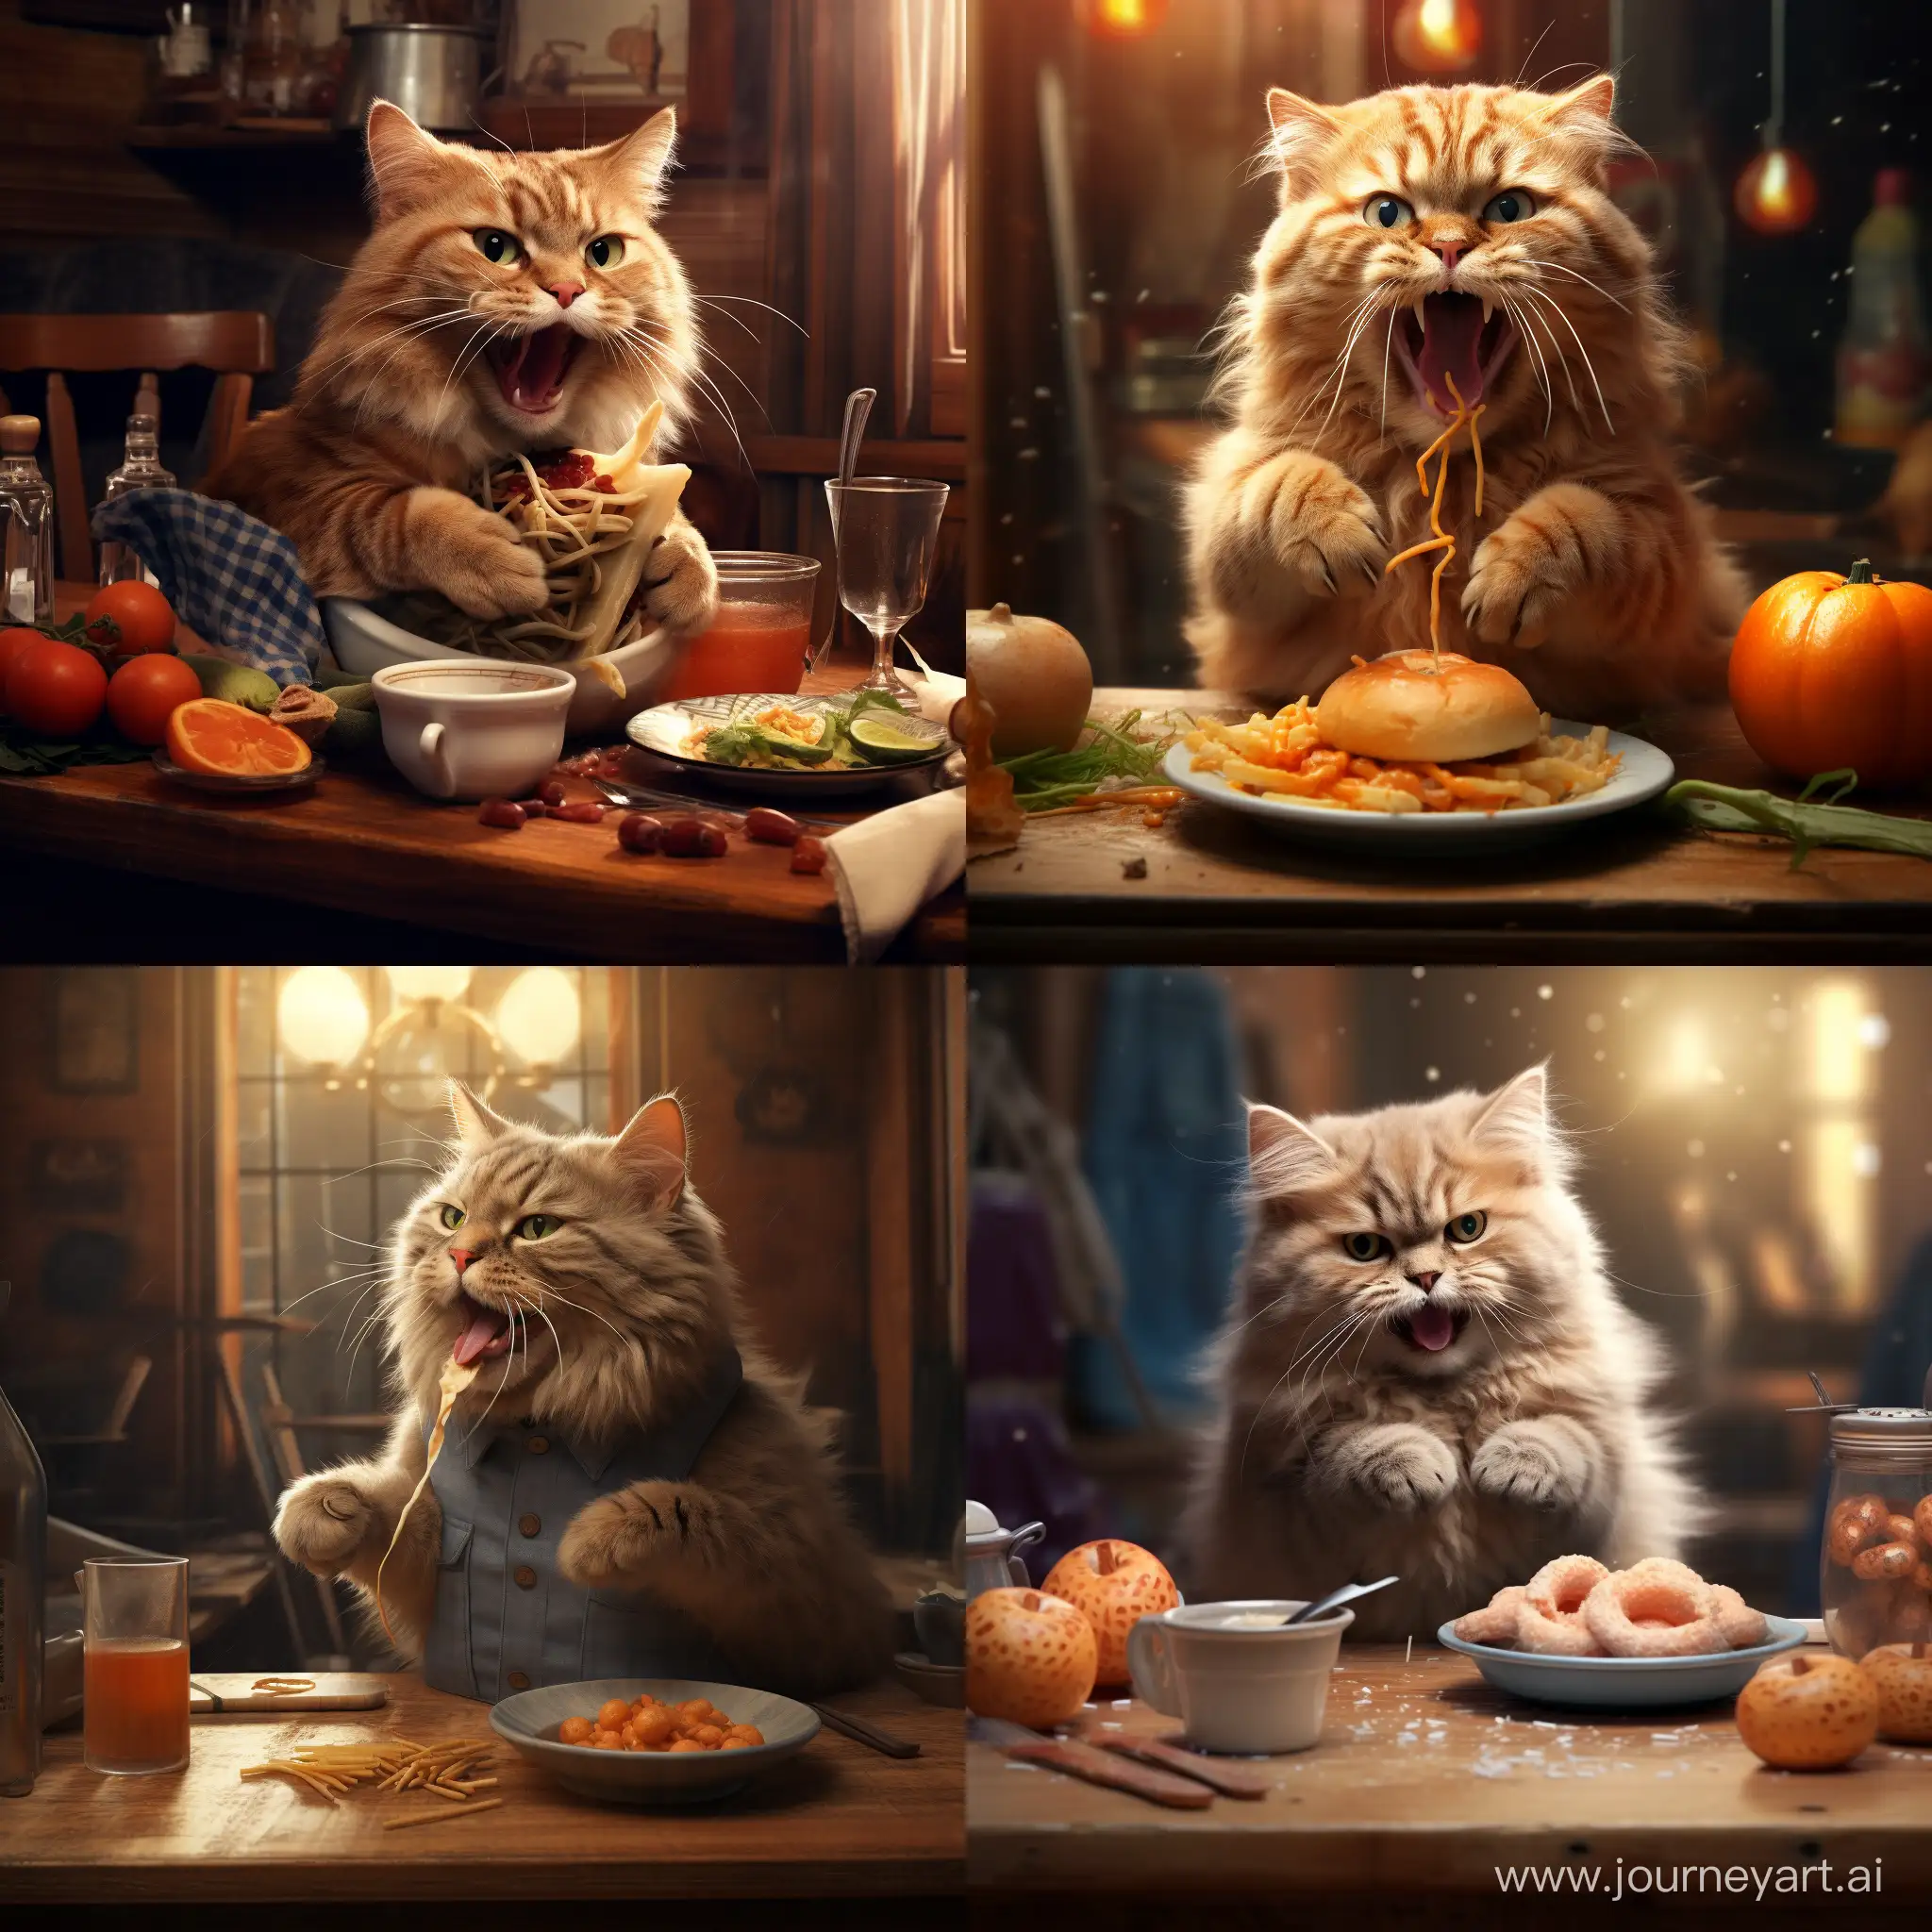 Cat eating tasty food and licking lips. Must be photorealistic and there must be bon appetit text.